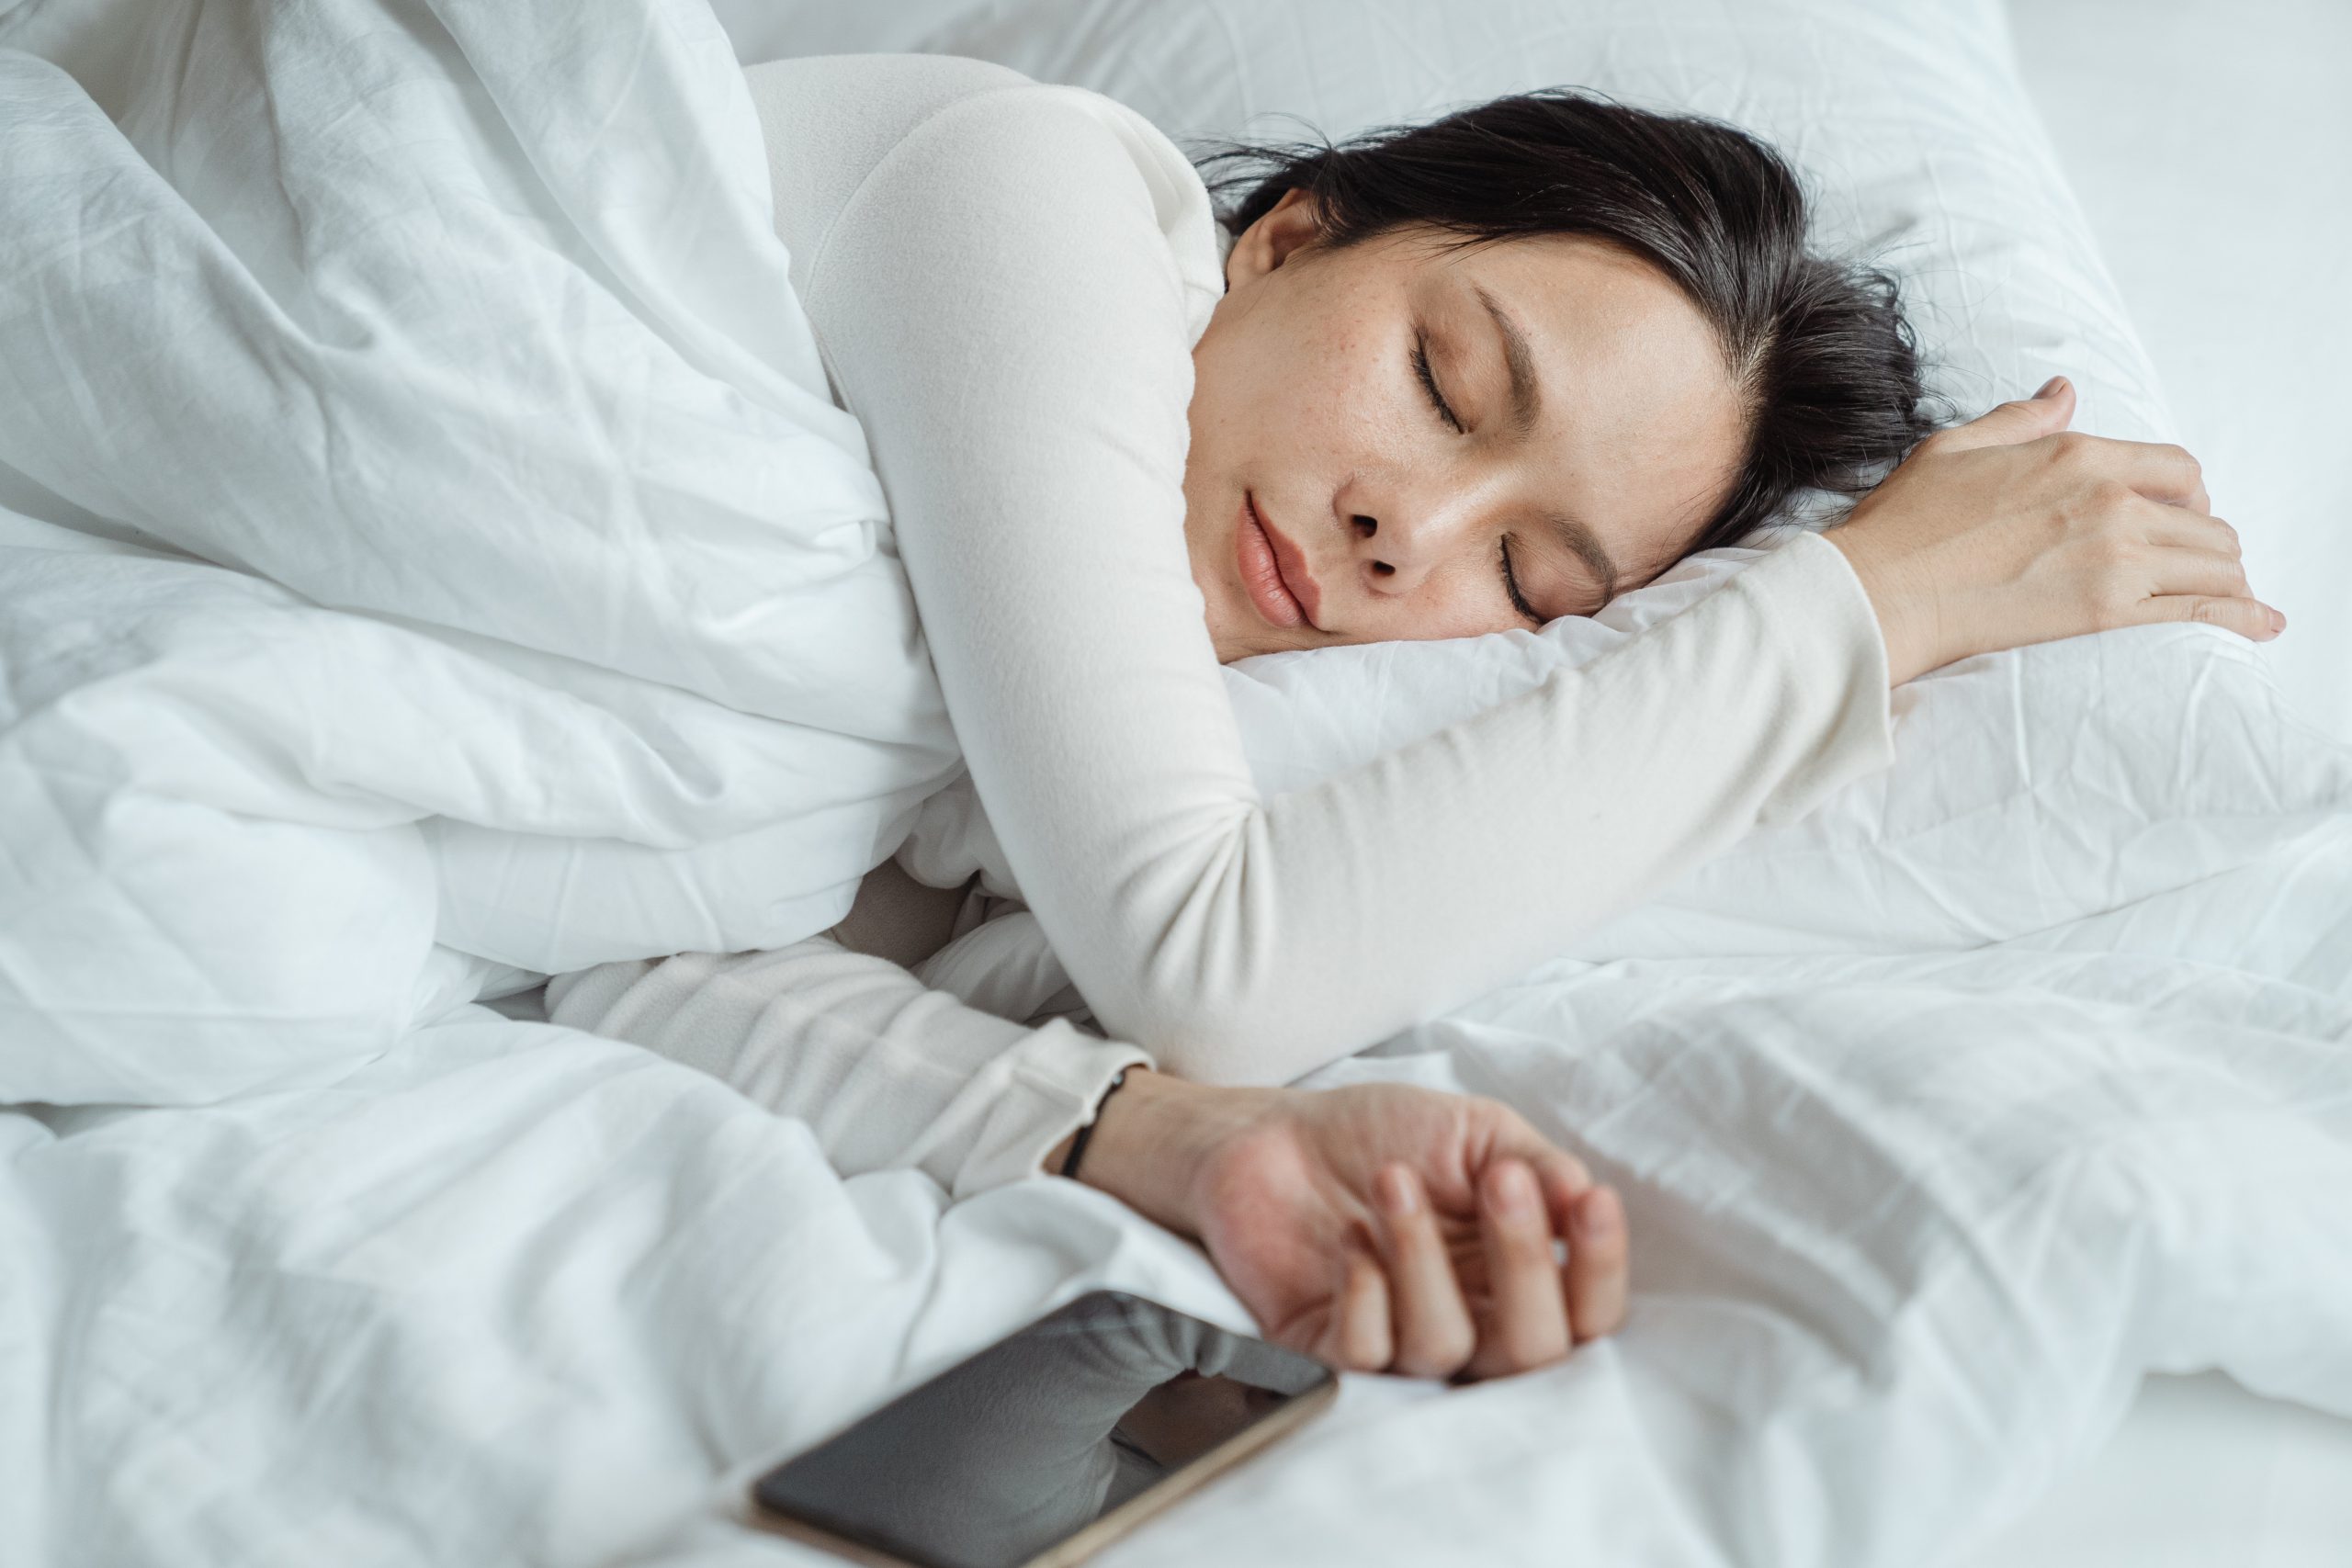 The Dangers Of Sleep Texting: What You Need To Know